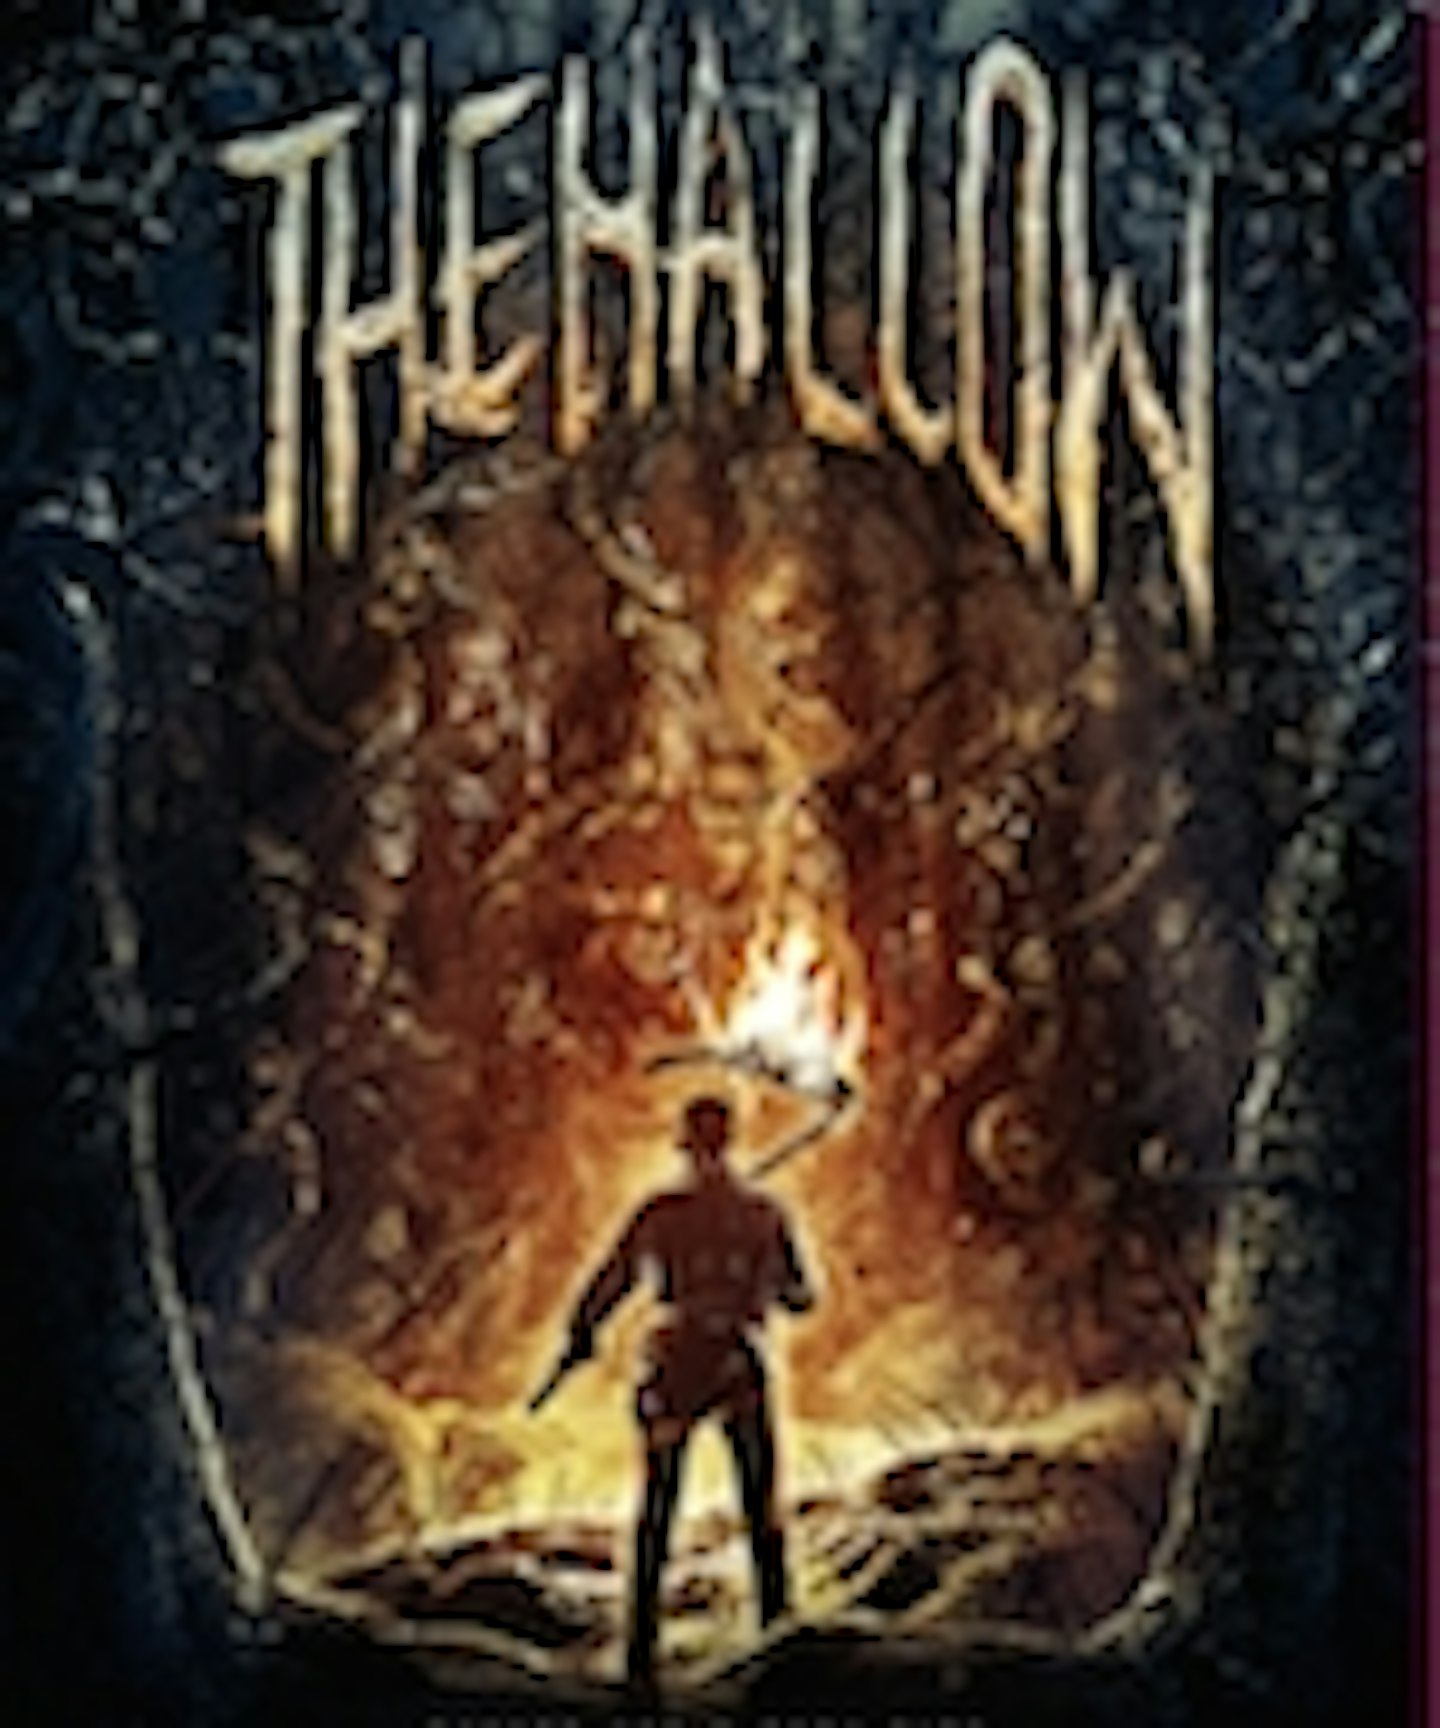 New Trailer For The Hallow Creeps In